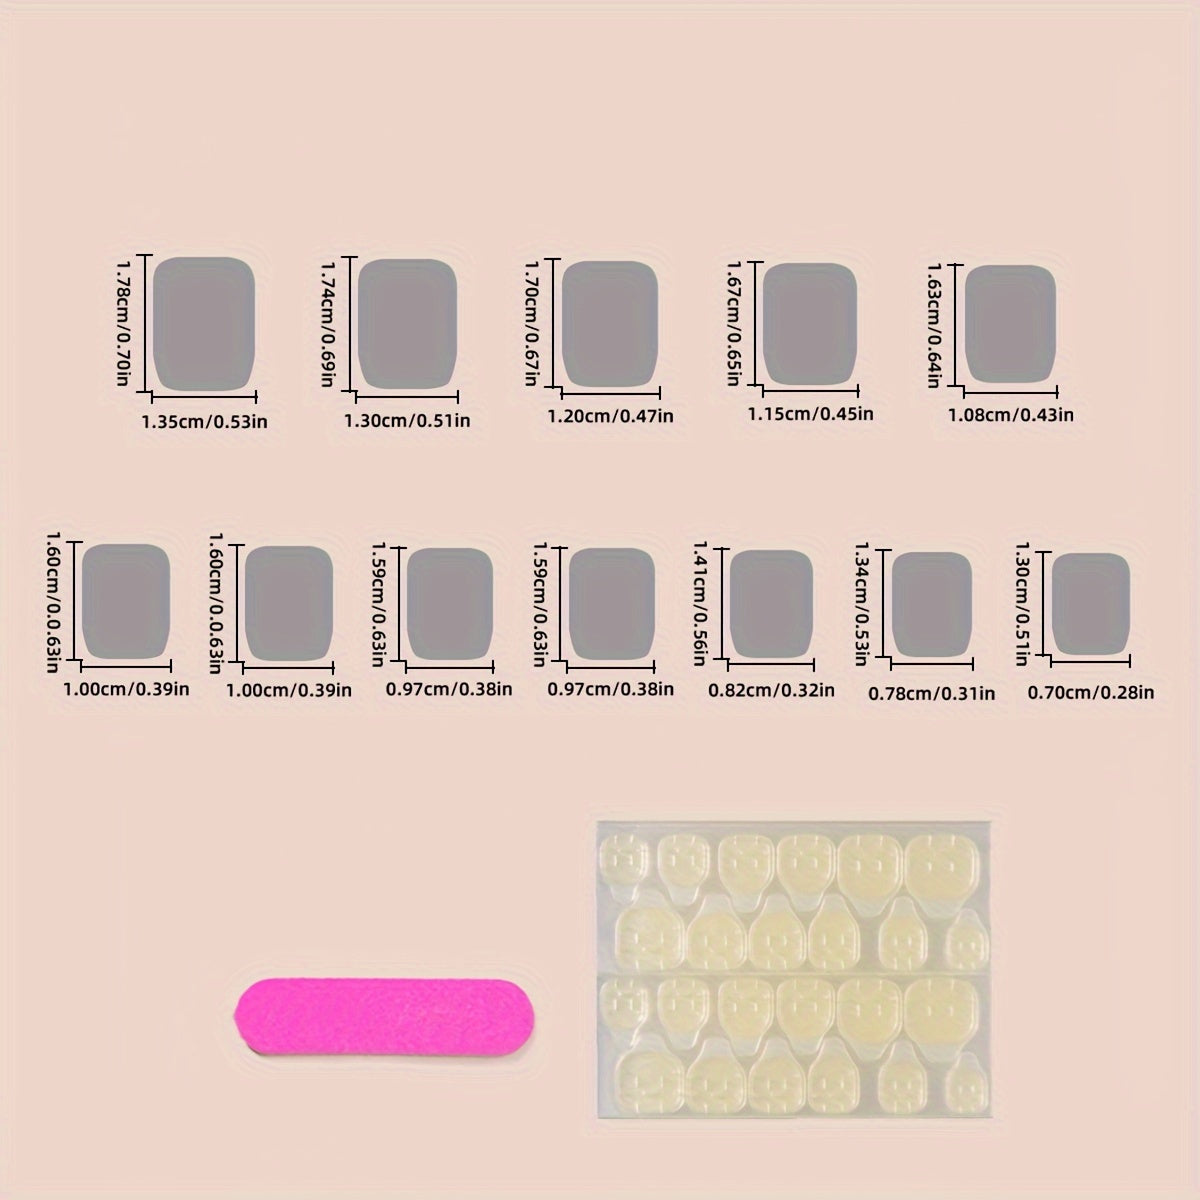 24-Piece Pink Butterfly Press-On Nails - Short Oval with Rhinestones, Durable Acrylic, Includes Nail File & Adhesive Tabs